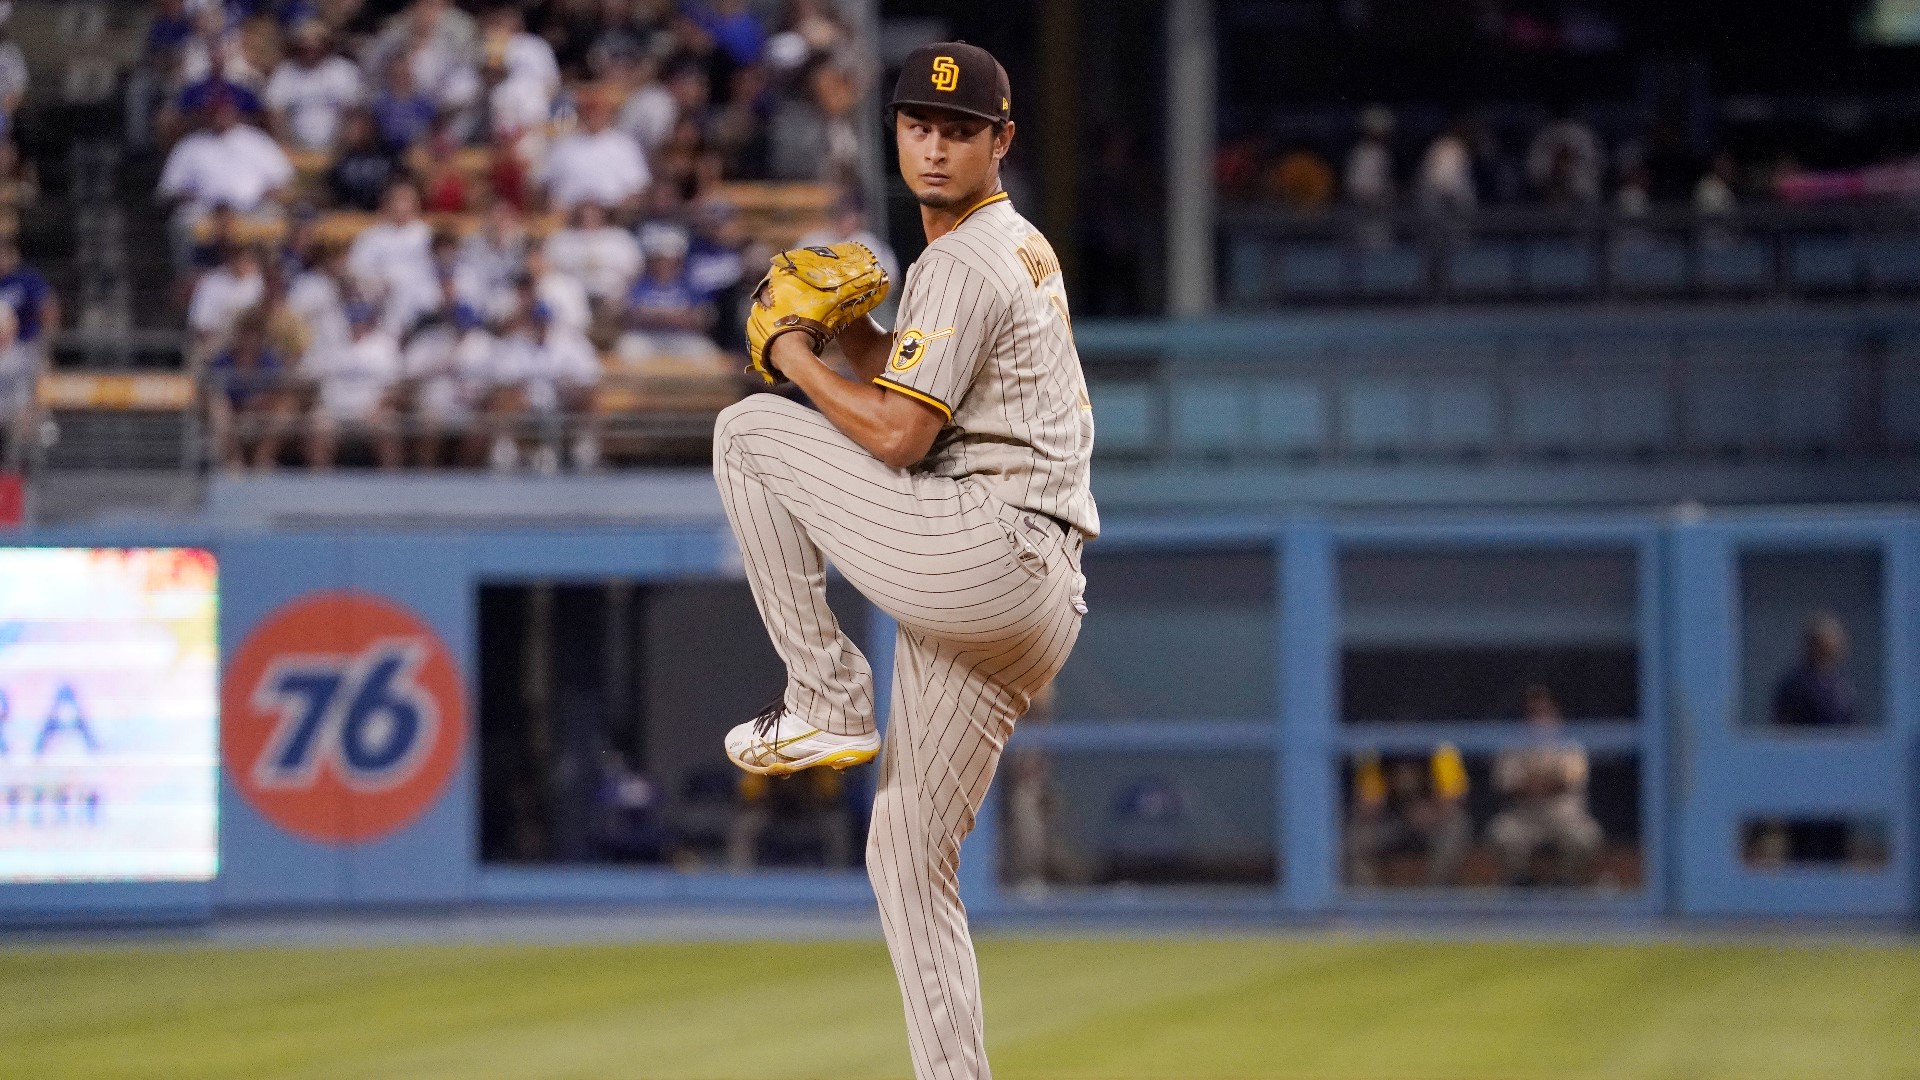 Dodgers lose to Padres in Game 3 of 2022 NLDS